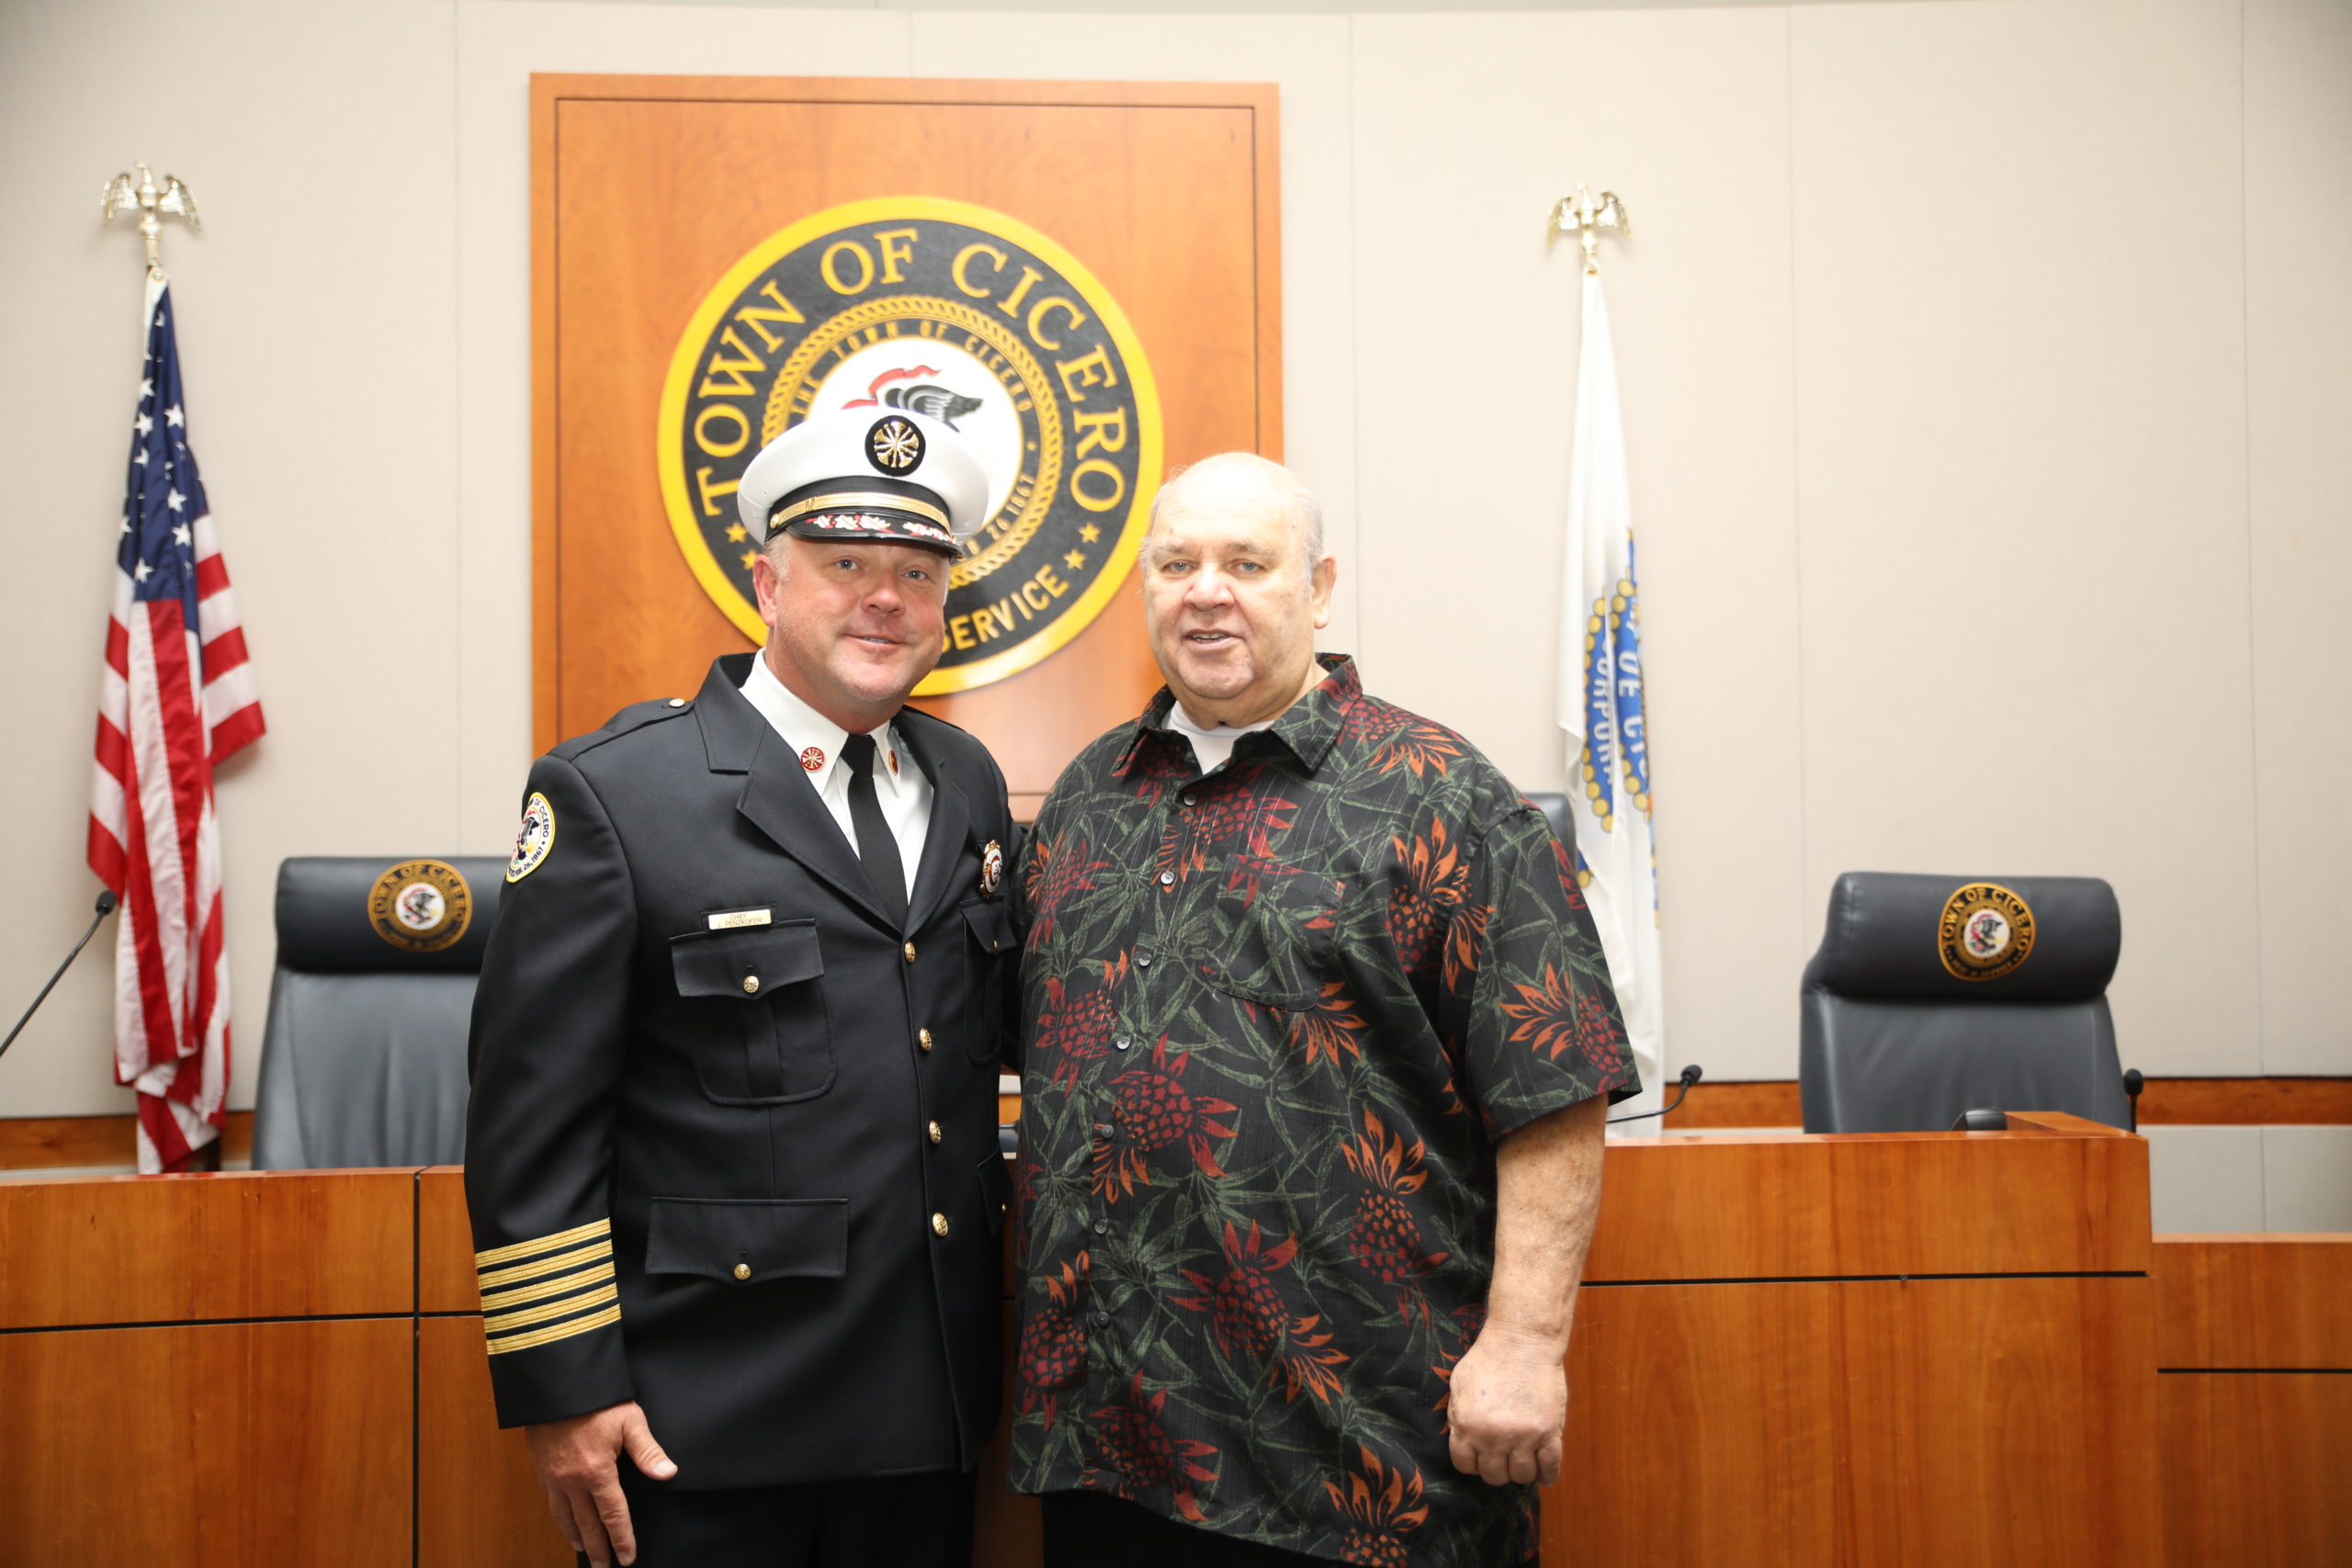 Cicero Fire Chief Jeffrey M. Penzkofer  with Cicero President Larry Dominick